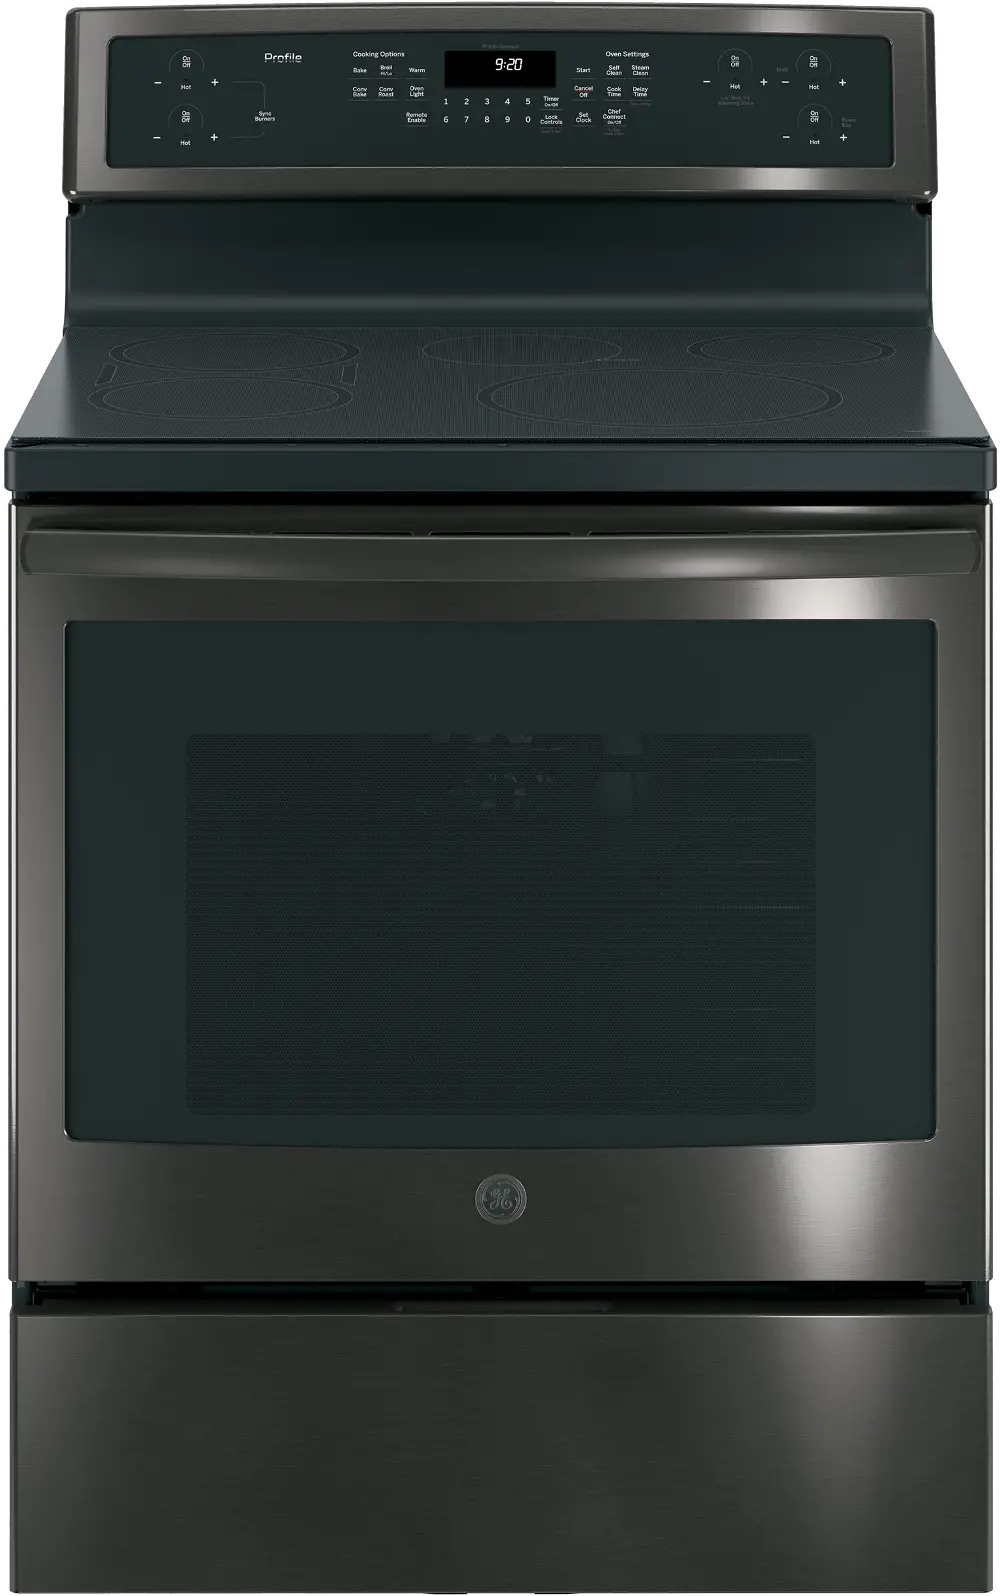 PHB920BJTS GE Profile Series 30  Free-Standing Convection Range with Induction - Black Stainless Steel-1